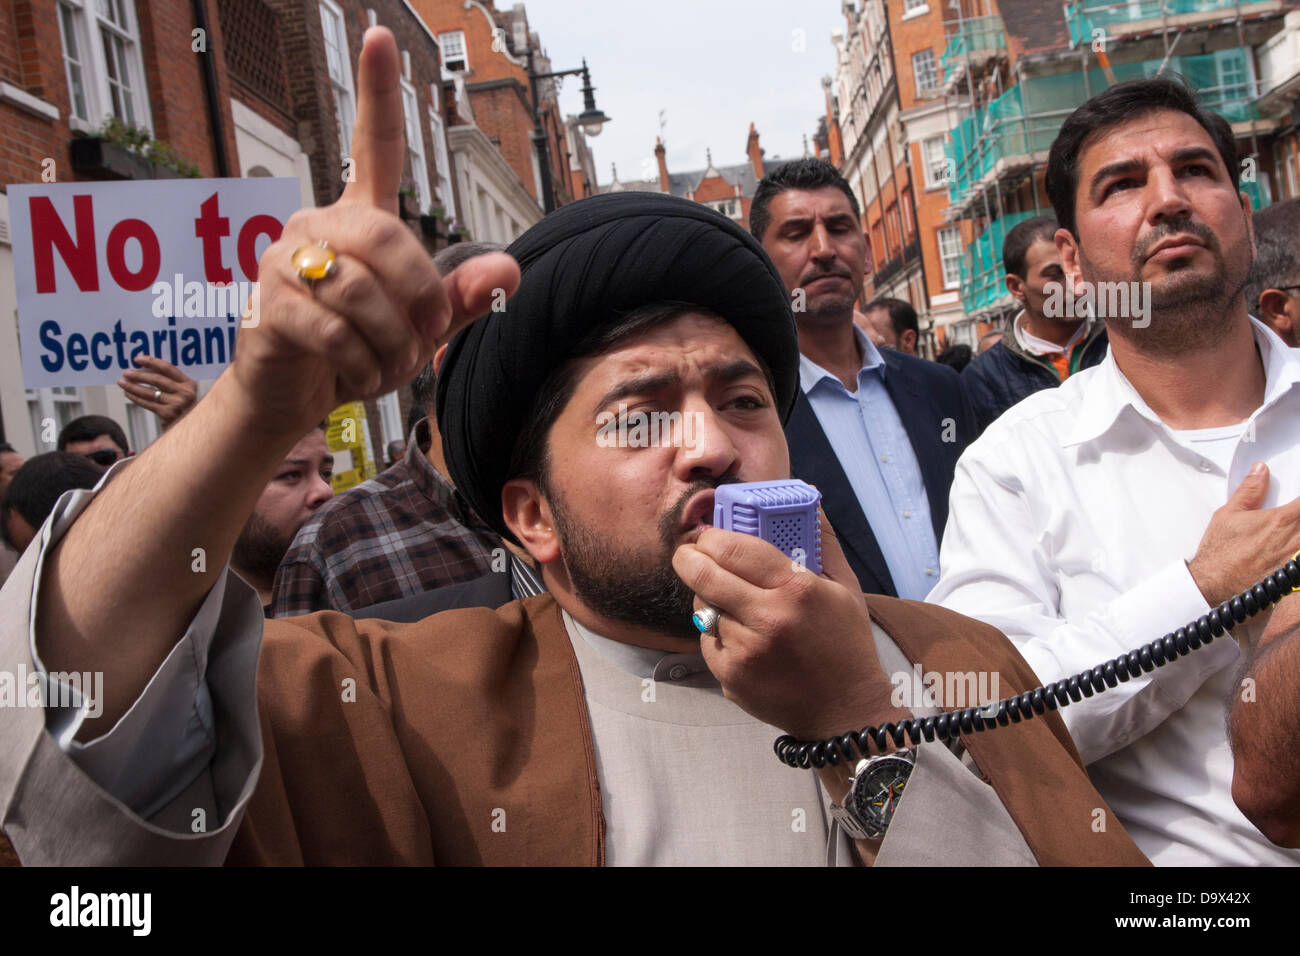 London, UK. 27th June 2013. A Muslim cleric addresses the crowd as Egyptians in London protest against sectarian killings in Egypt. Credit:  Paul Davey/Alamy Live News Stock Photo